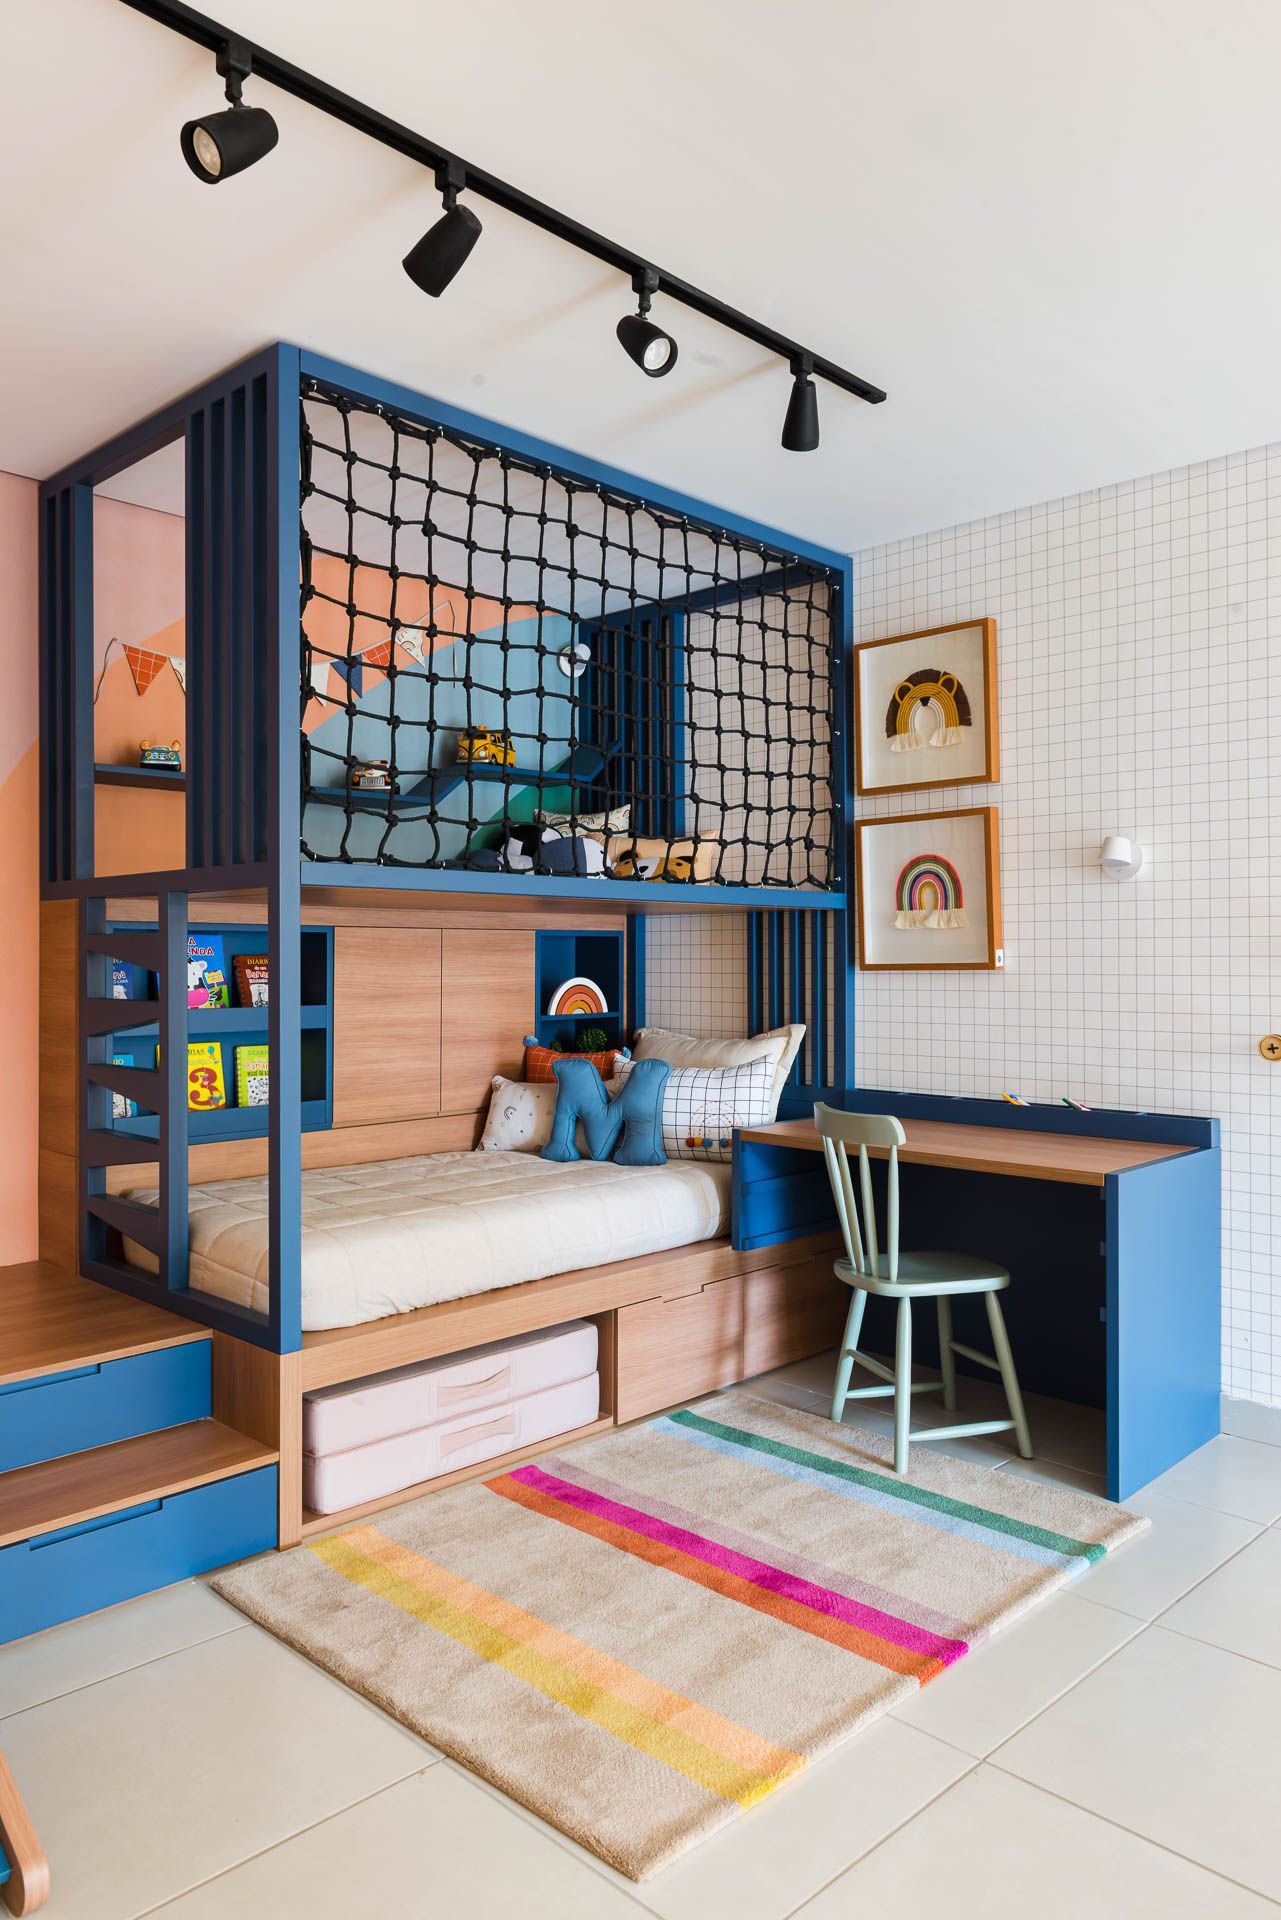 Dreamy Designs: Explore Toddler Bed Designs for Your Little One